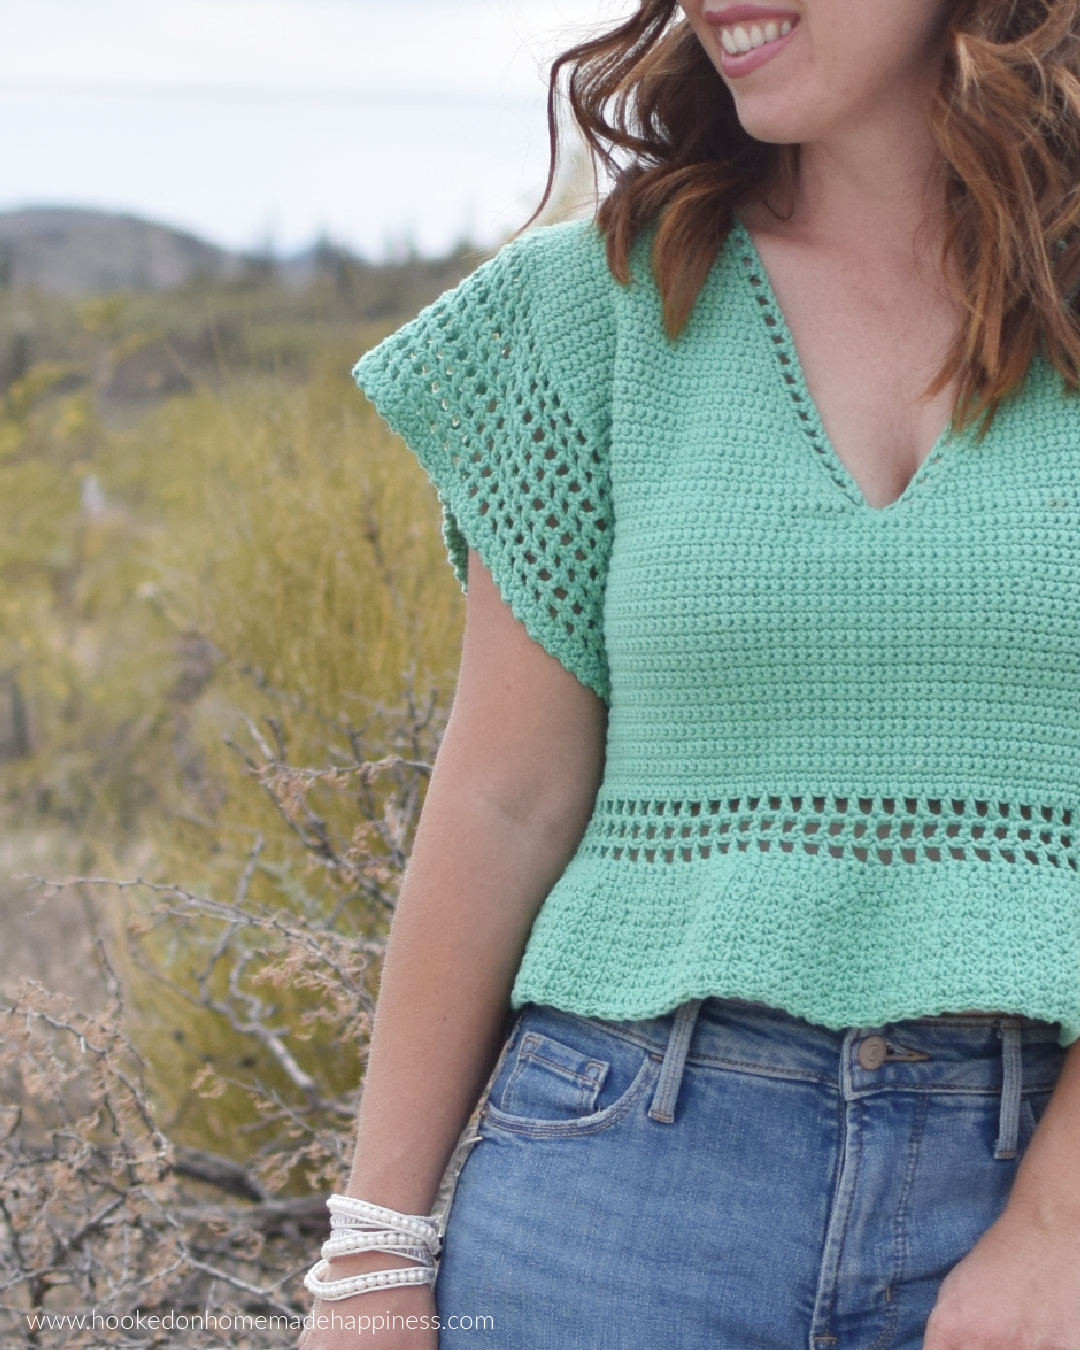 Garden Party Top Crochet Pattern - Hooked on Homemade Happiness